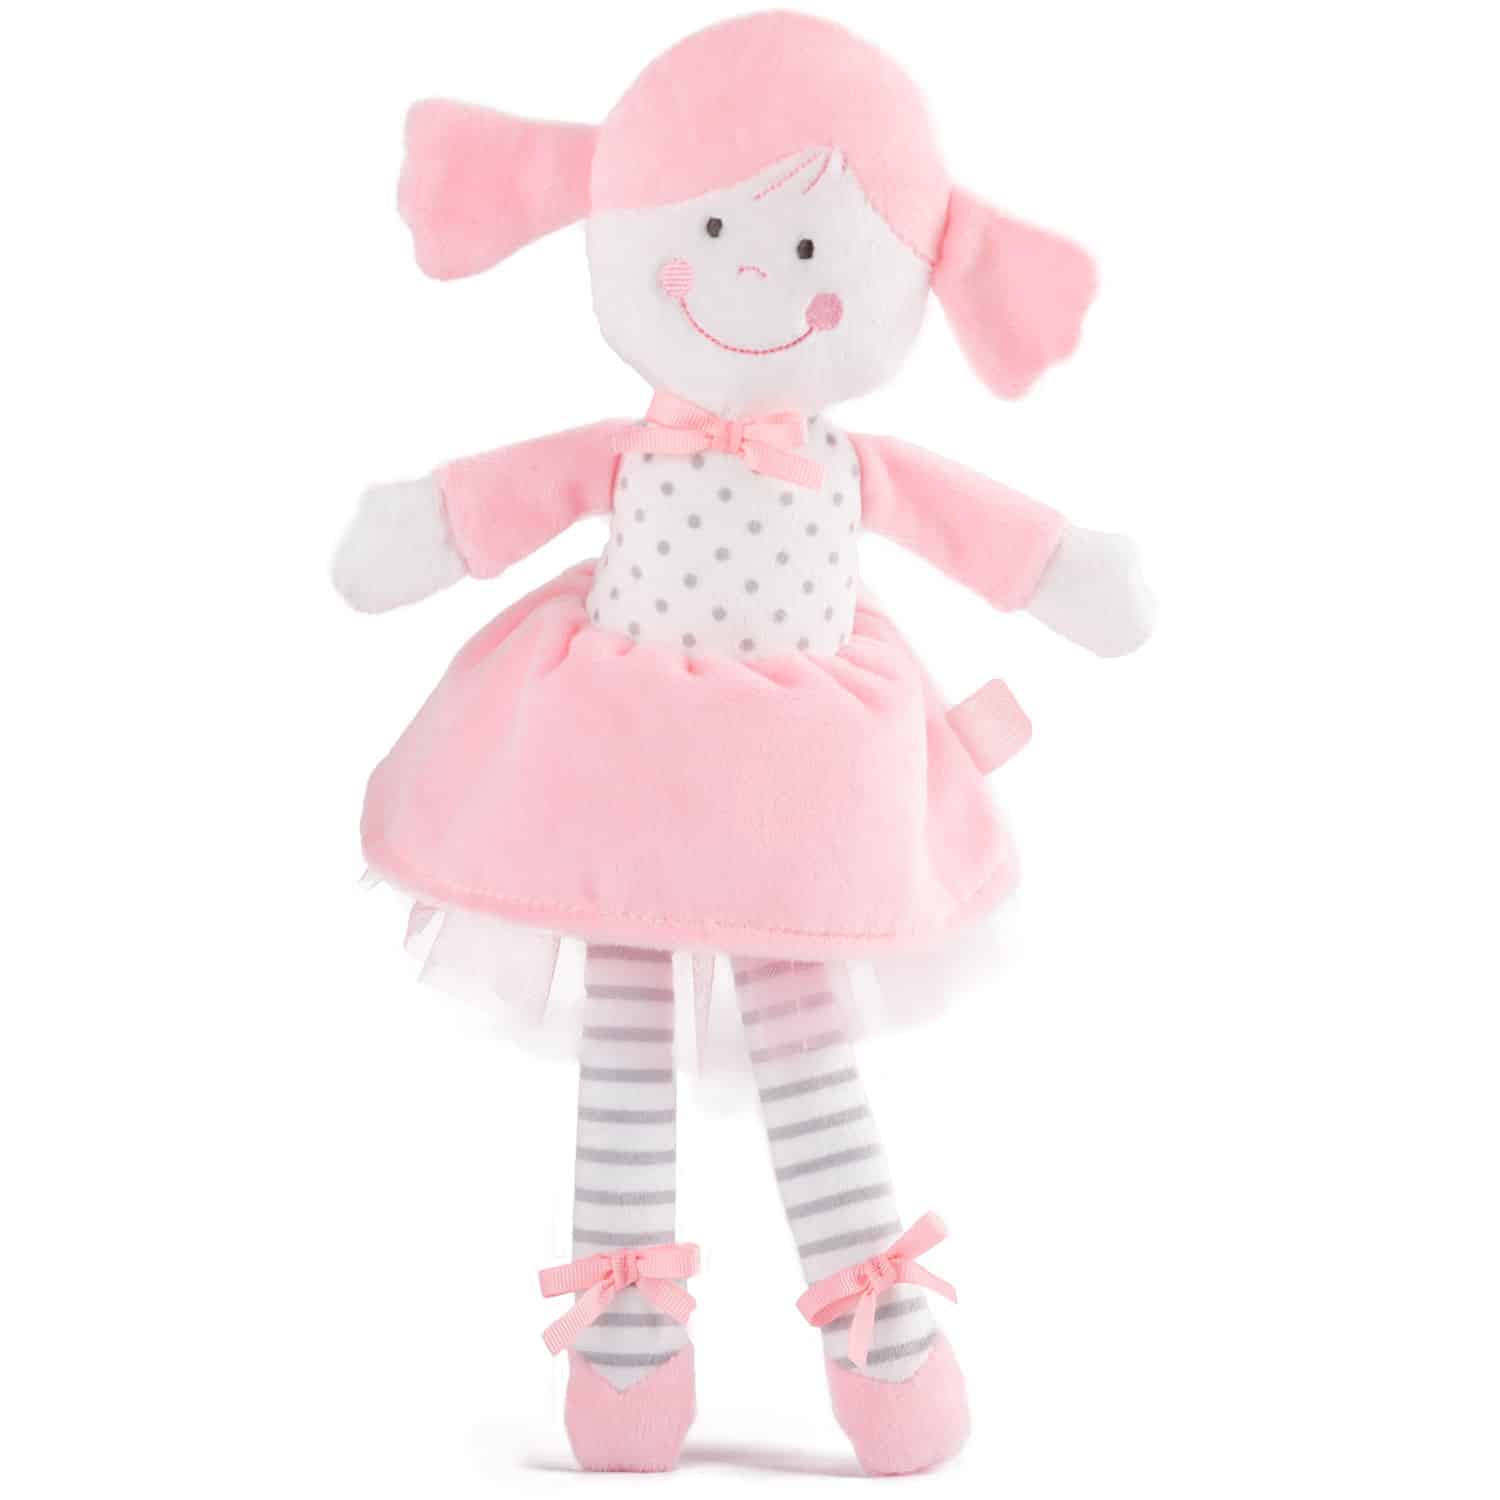 Baby soft doll DOLLY - Pink